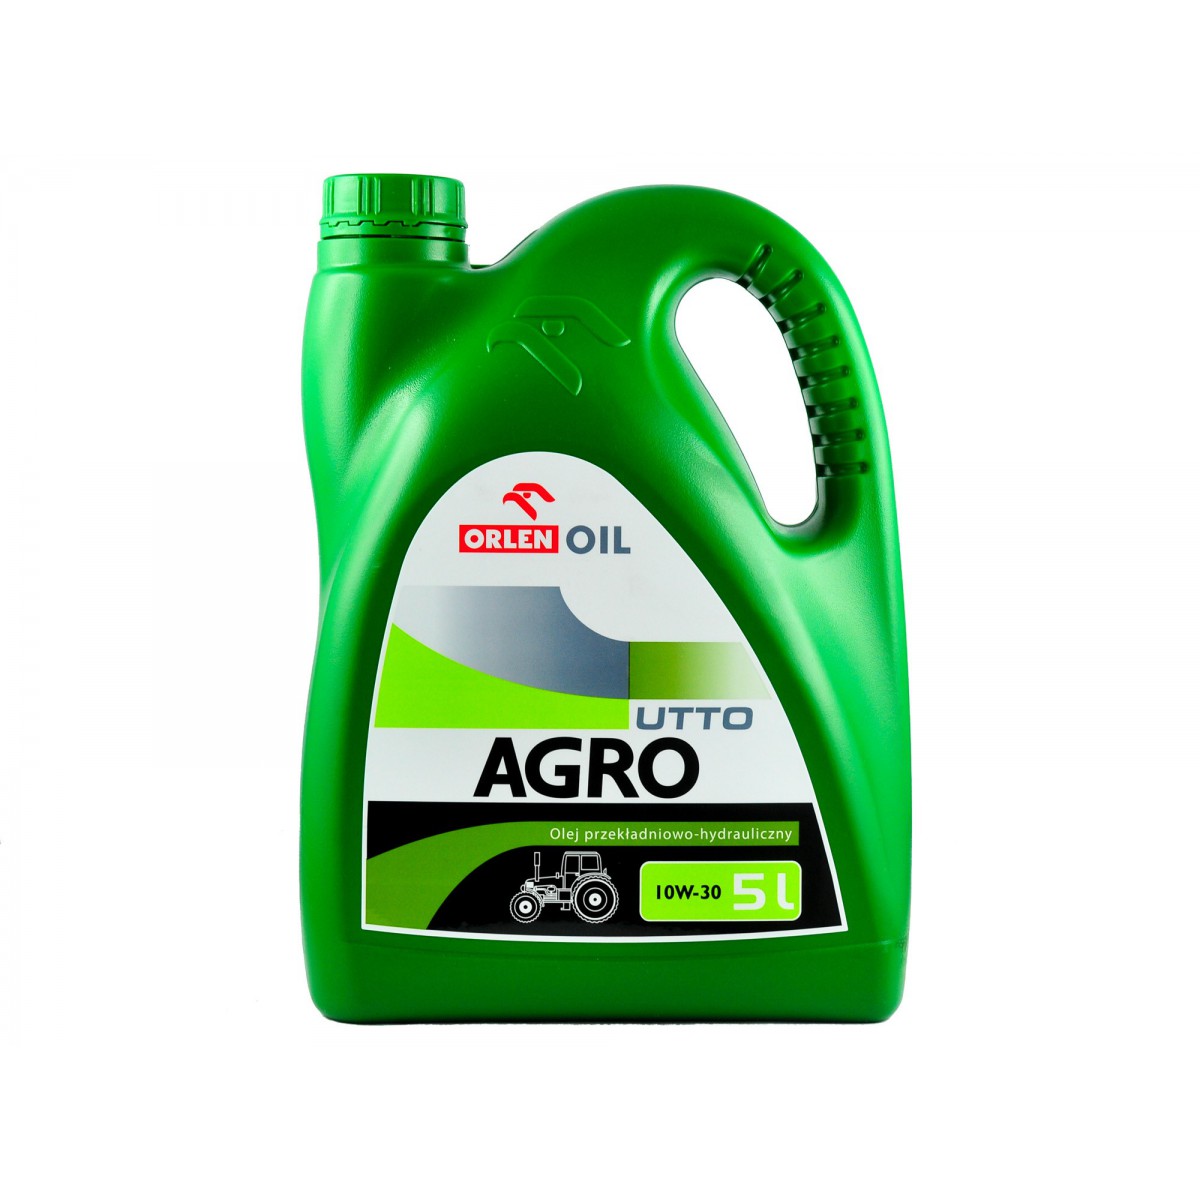 AGRO UTTO 10W-30 transmission and hydraulic oil